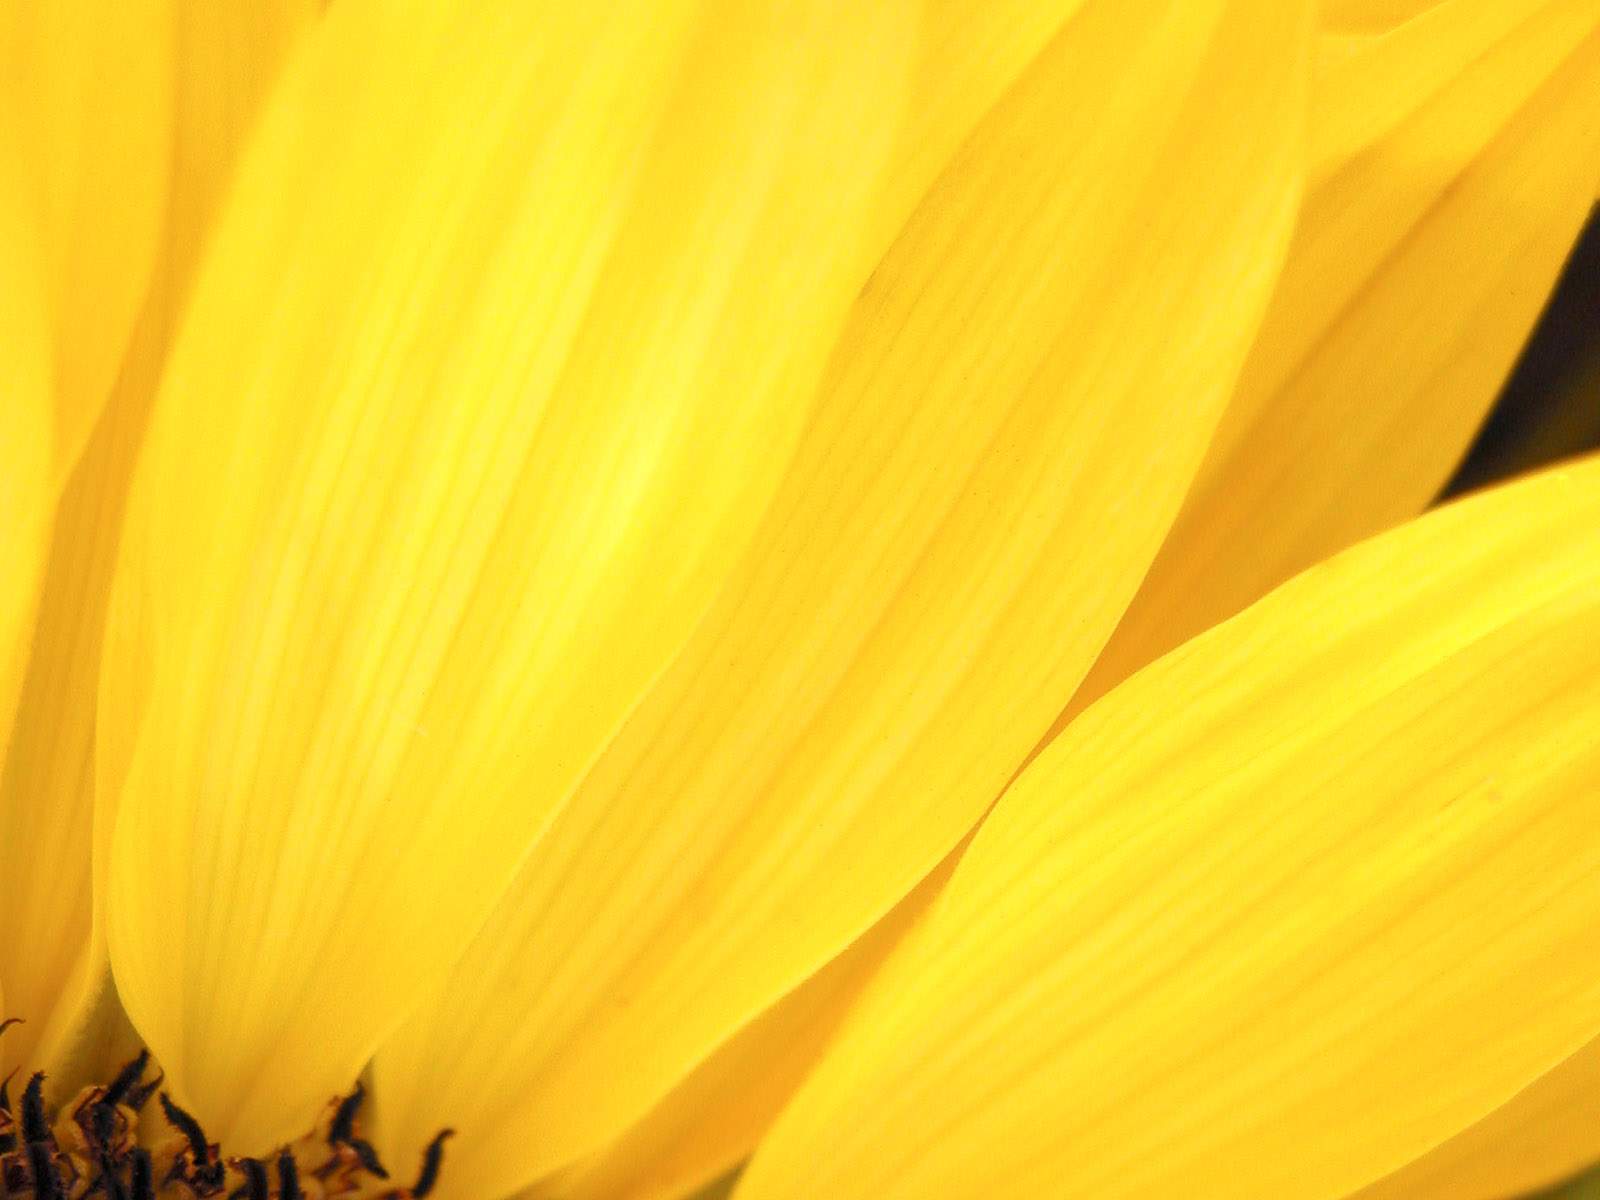 And White Wallpaper Yellow Flower Close Up Photo